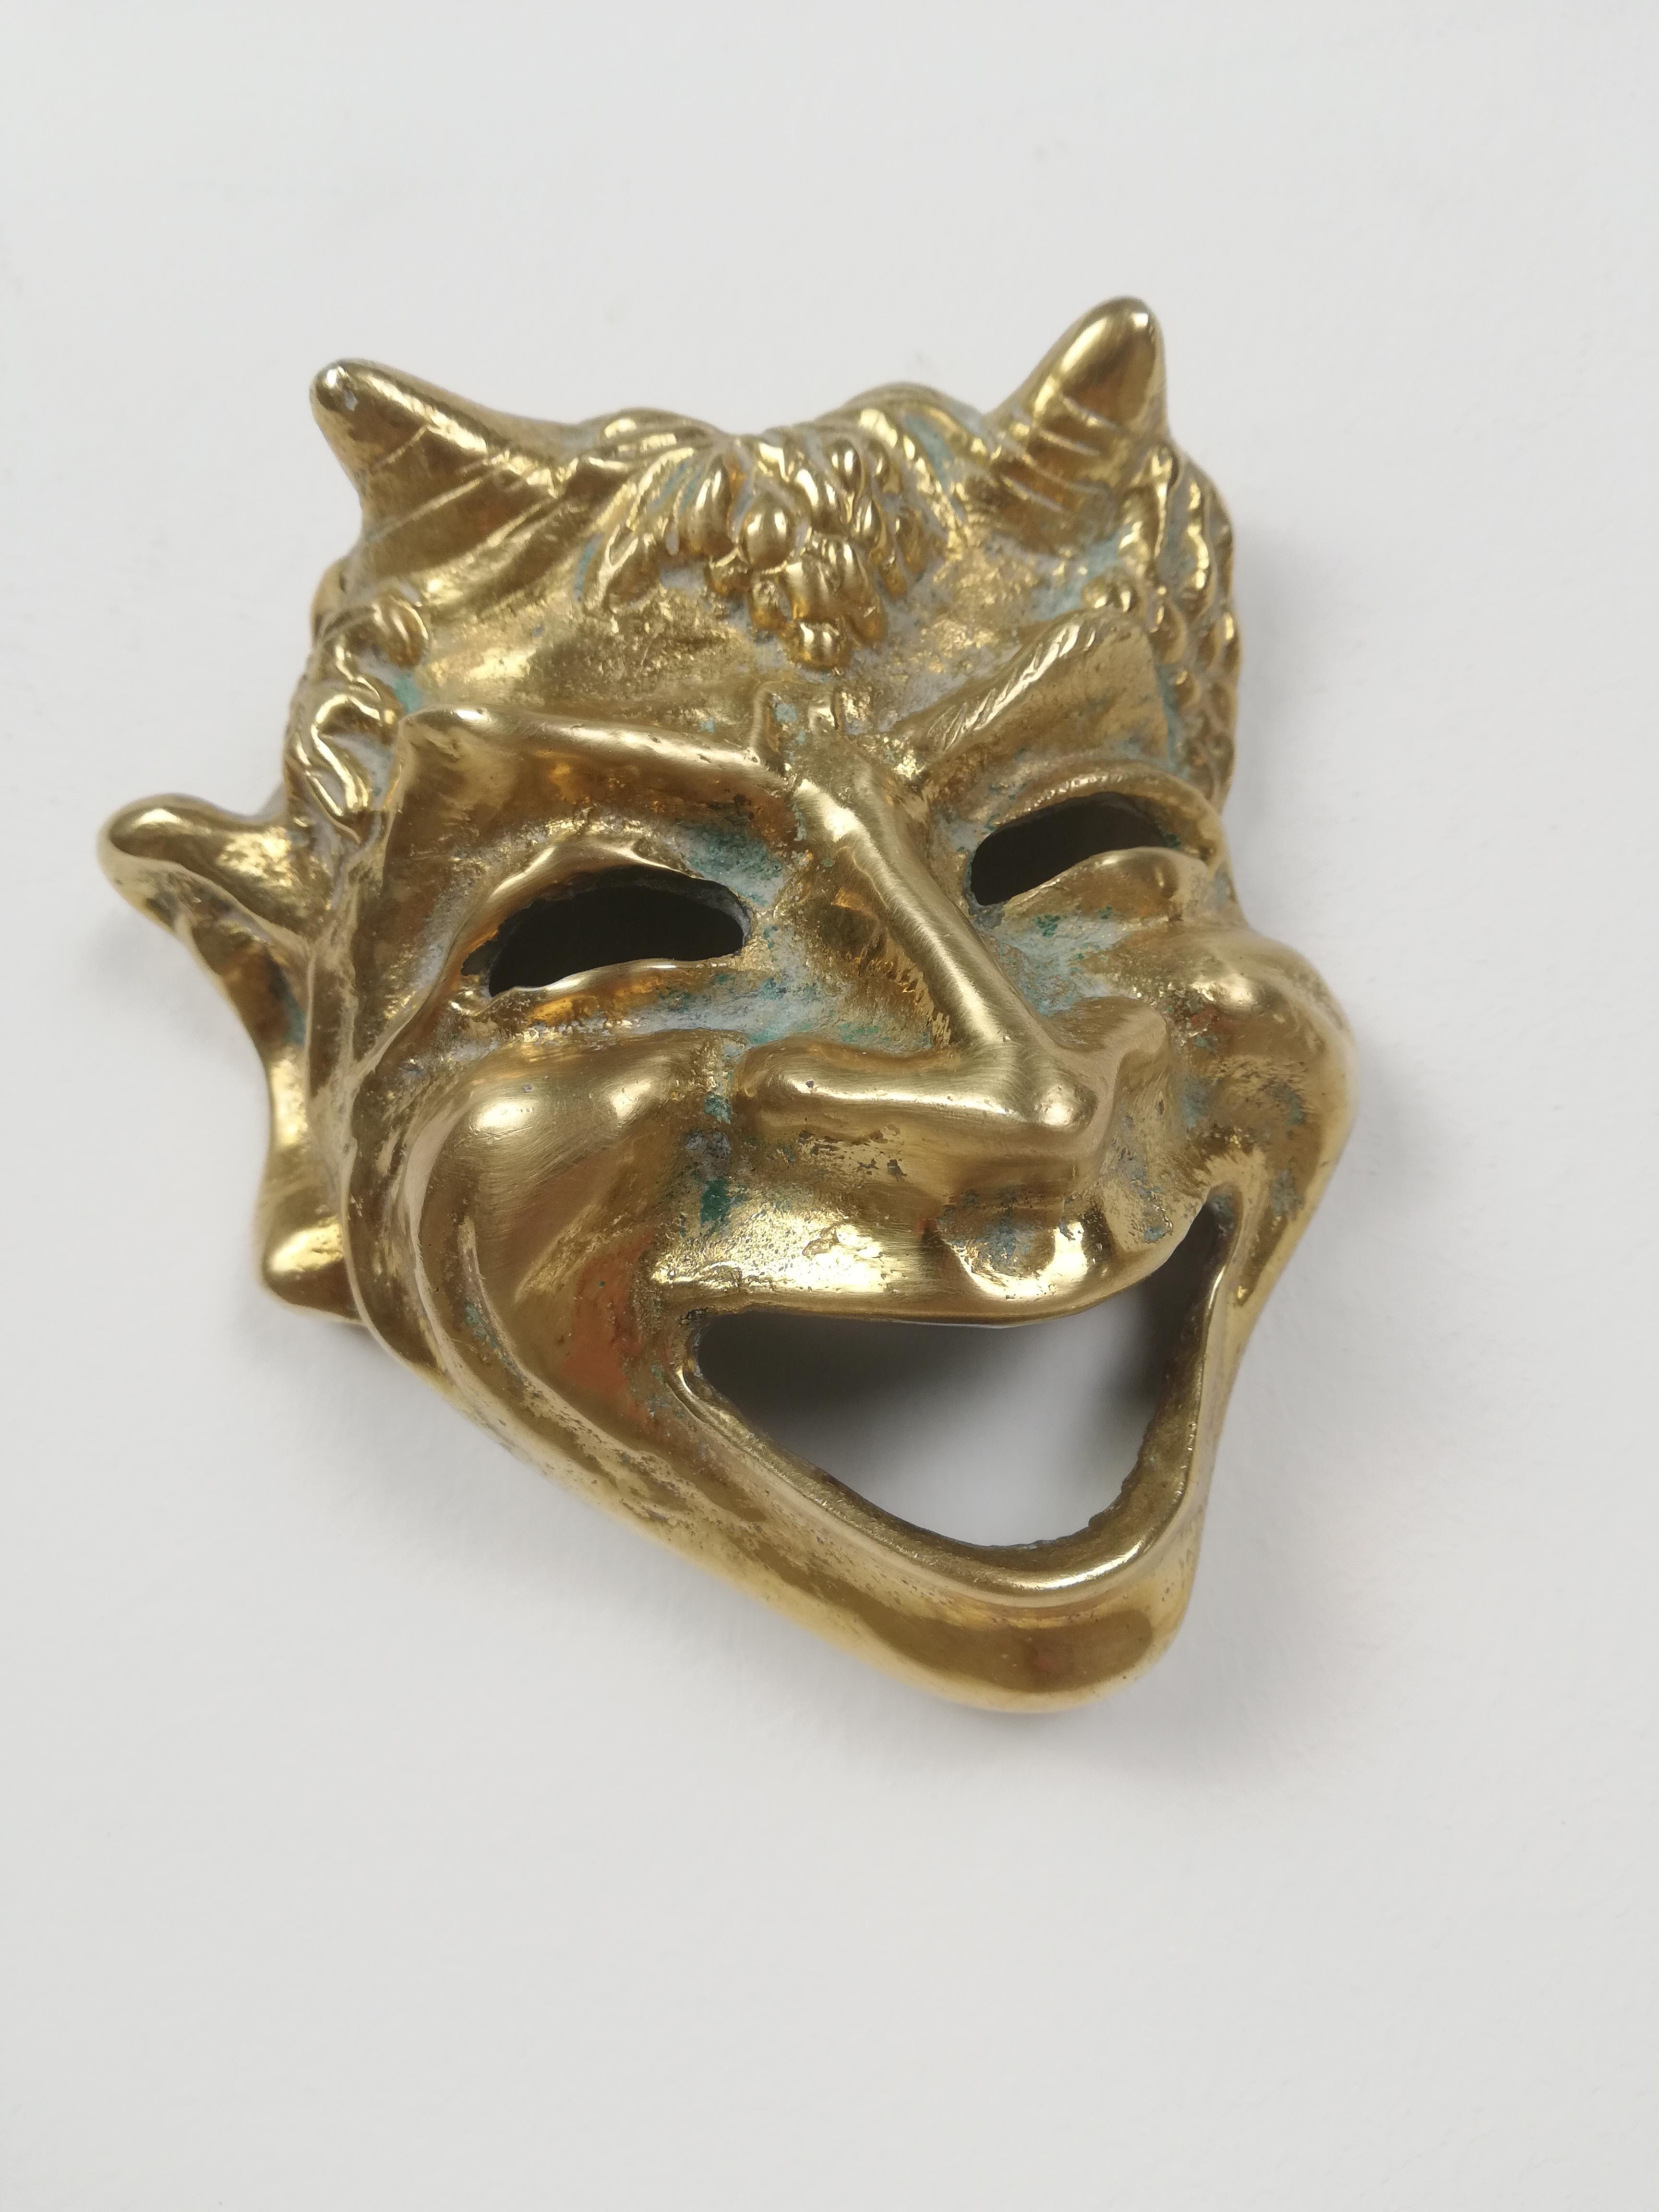 greek tragedy and comedy masks